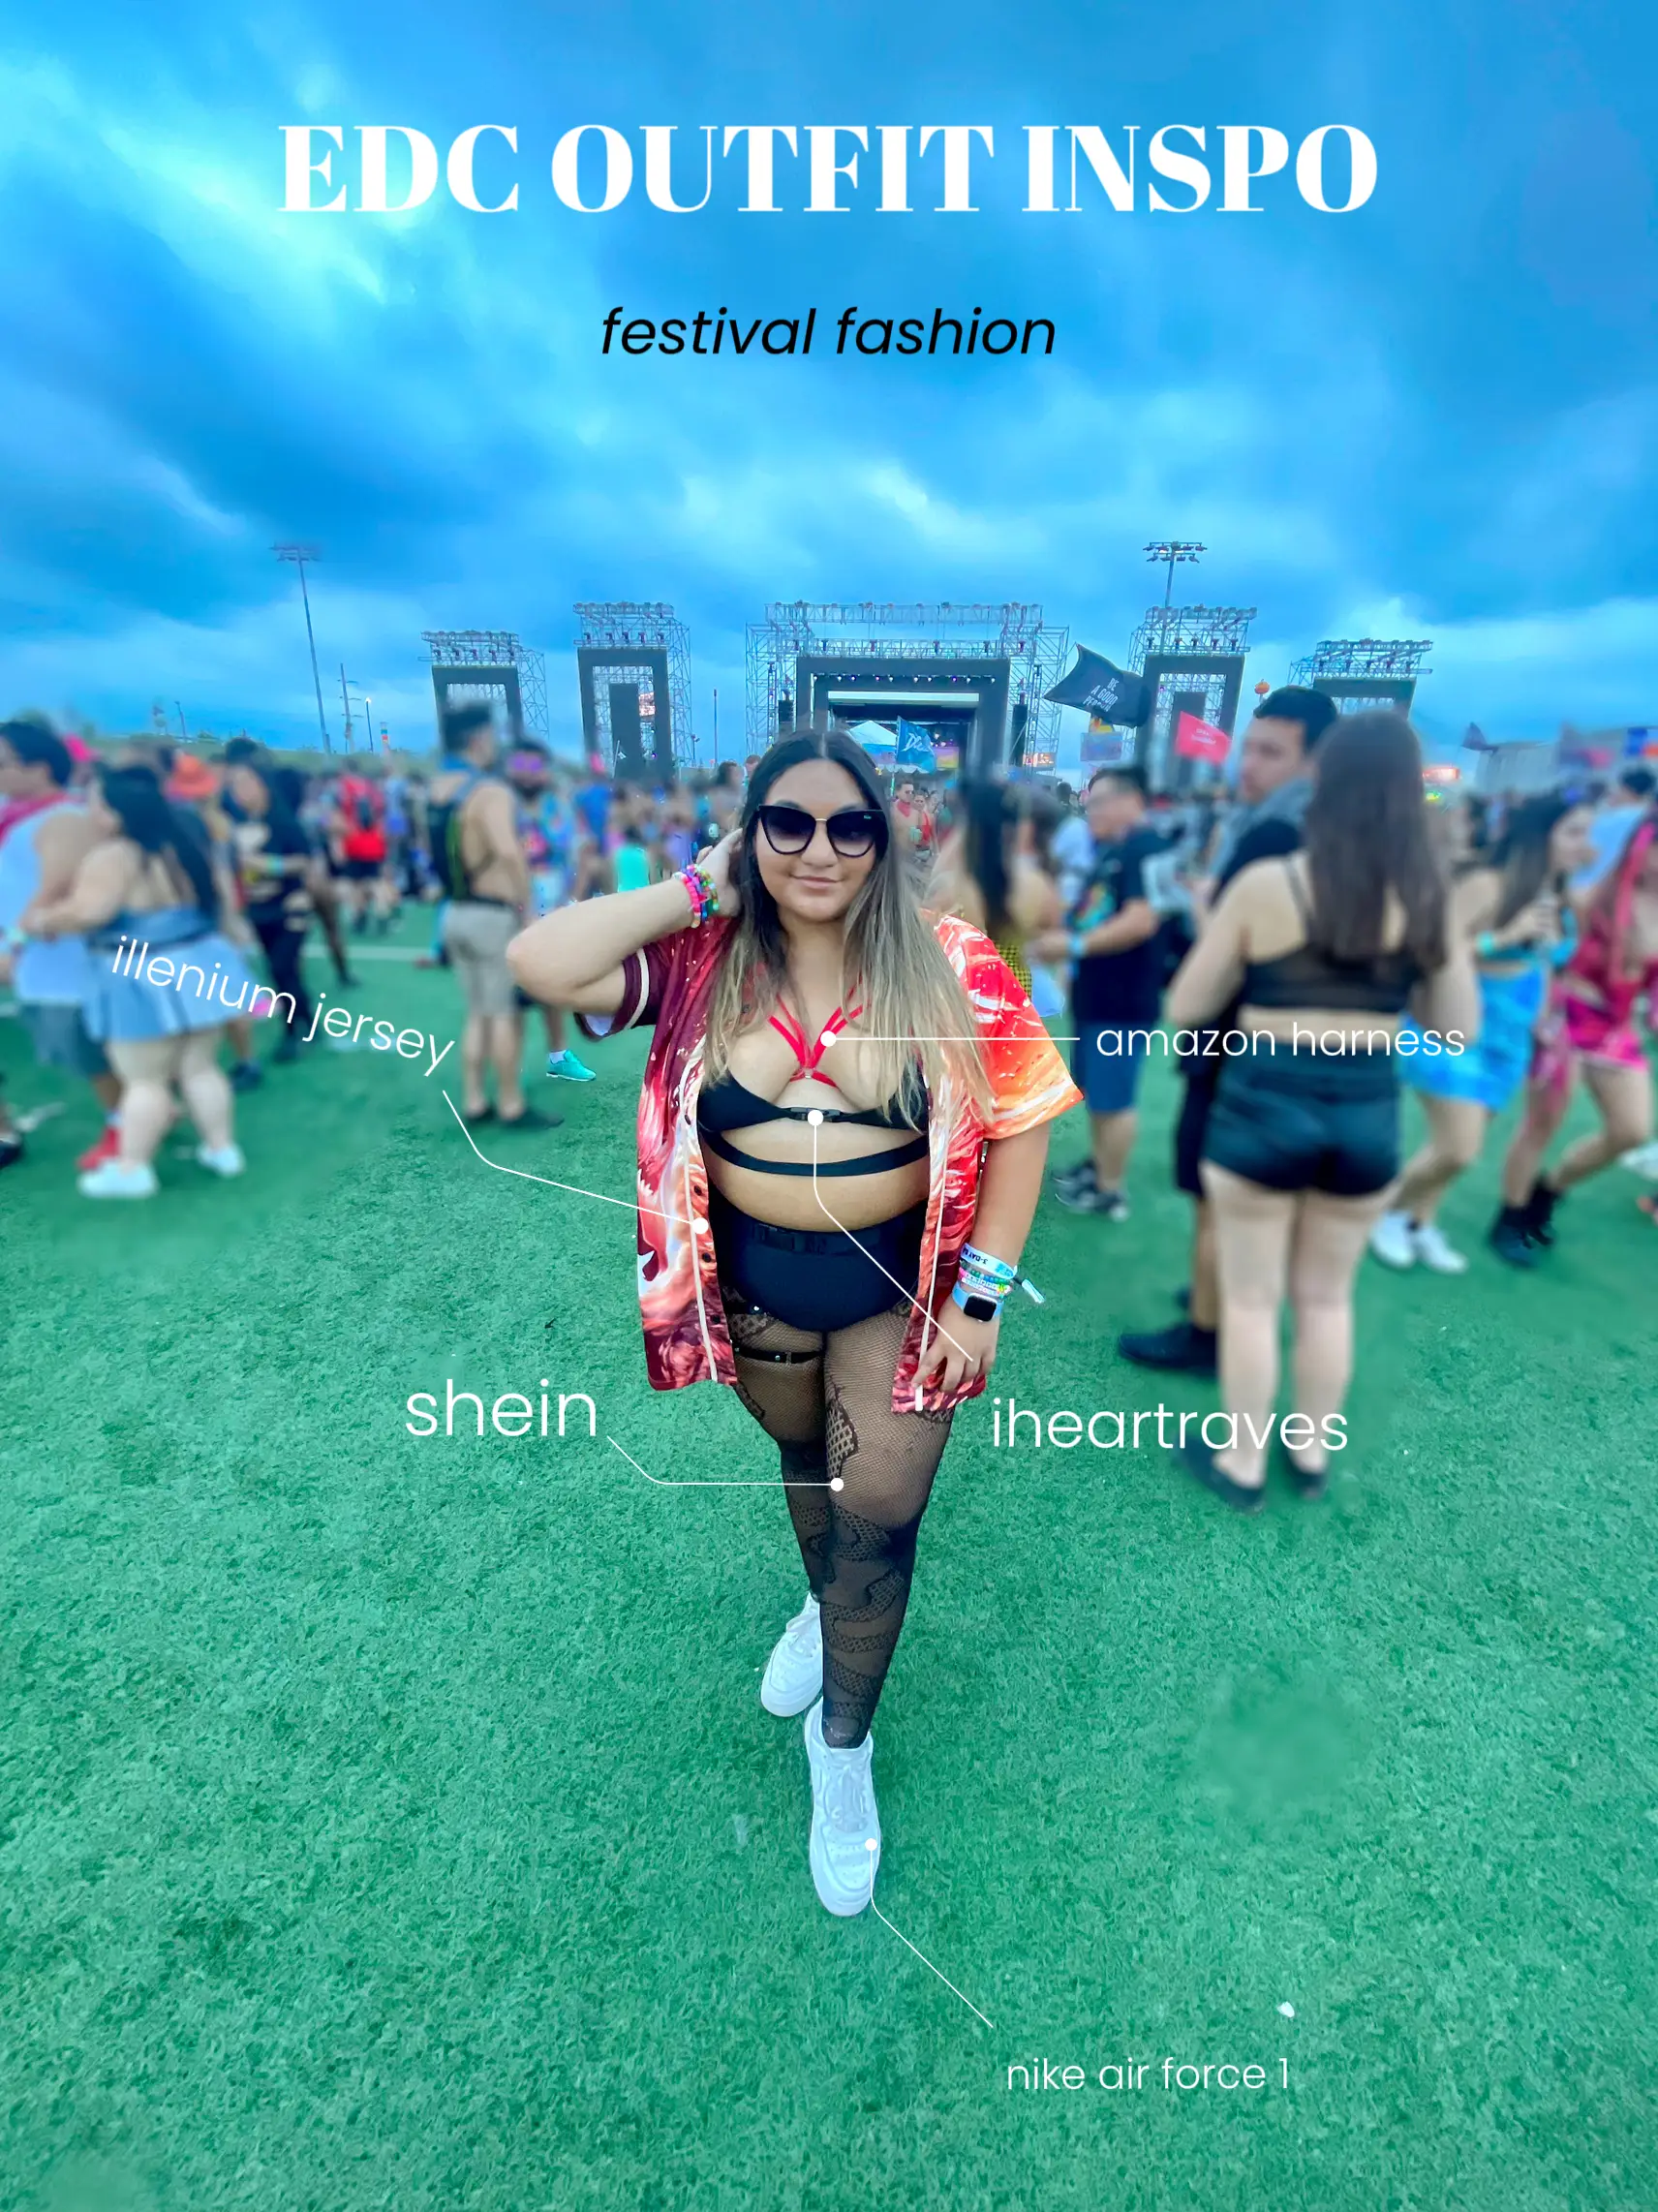 Festival Outfit Inspo ⚡️, Gallery posted by dianira